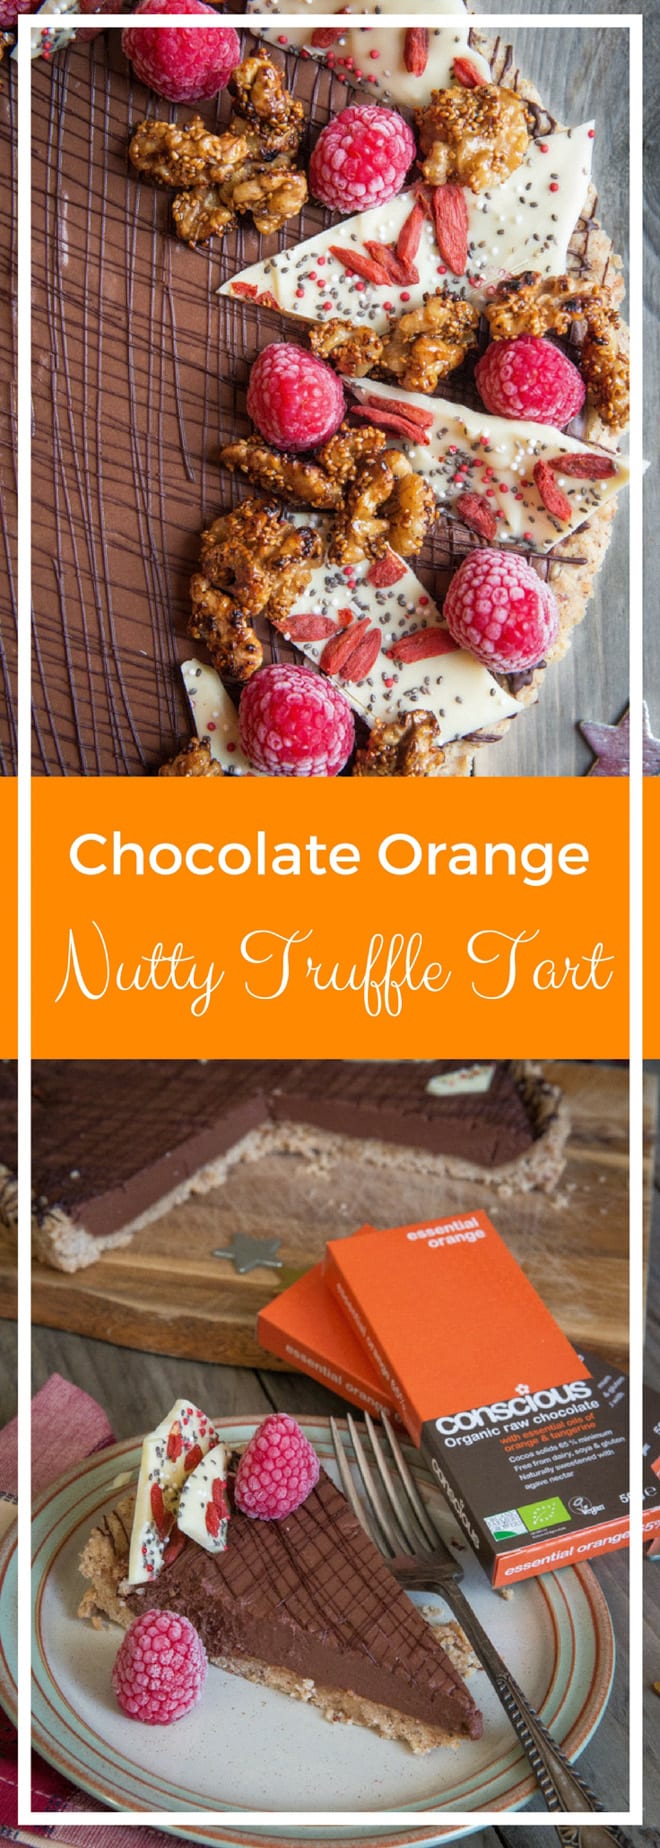 Chocolate Orange Nutty Truffle Tart - silky smooth, not too sweet and filled with rich dark orange chocolate - utterly delicious as well as vegan and gluten free | thecookandhim.com